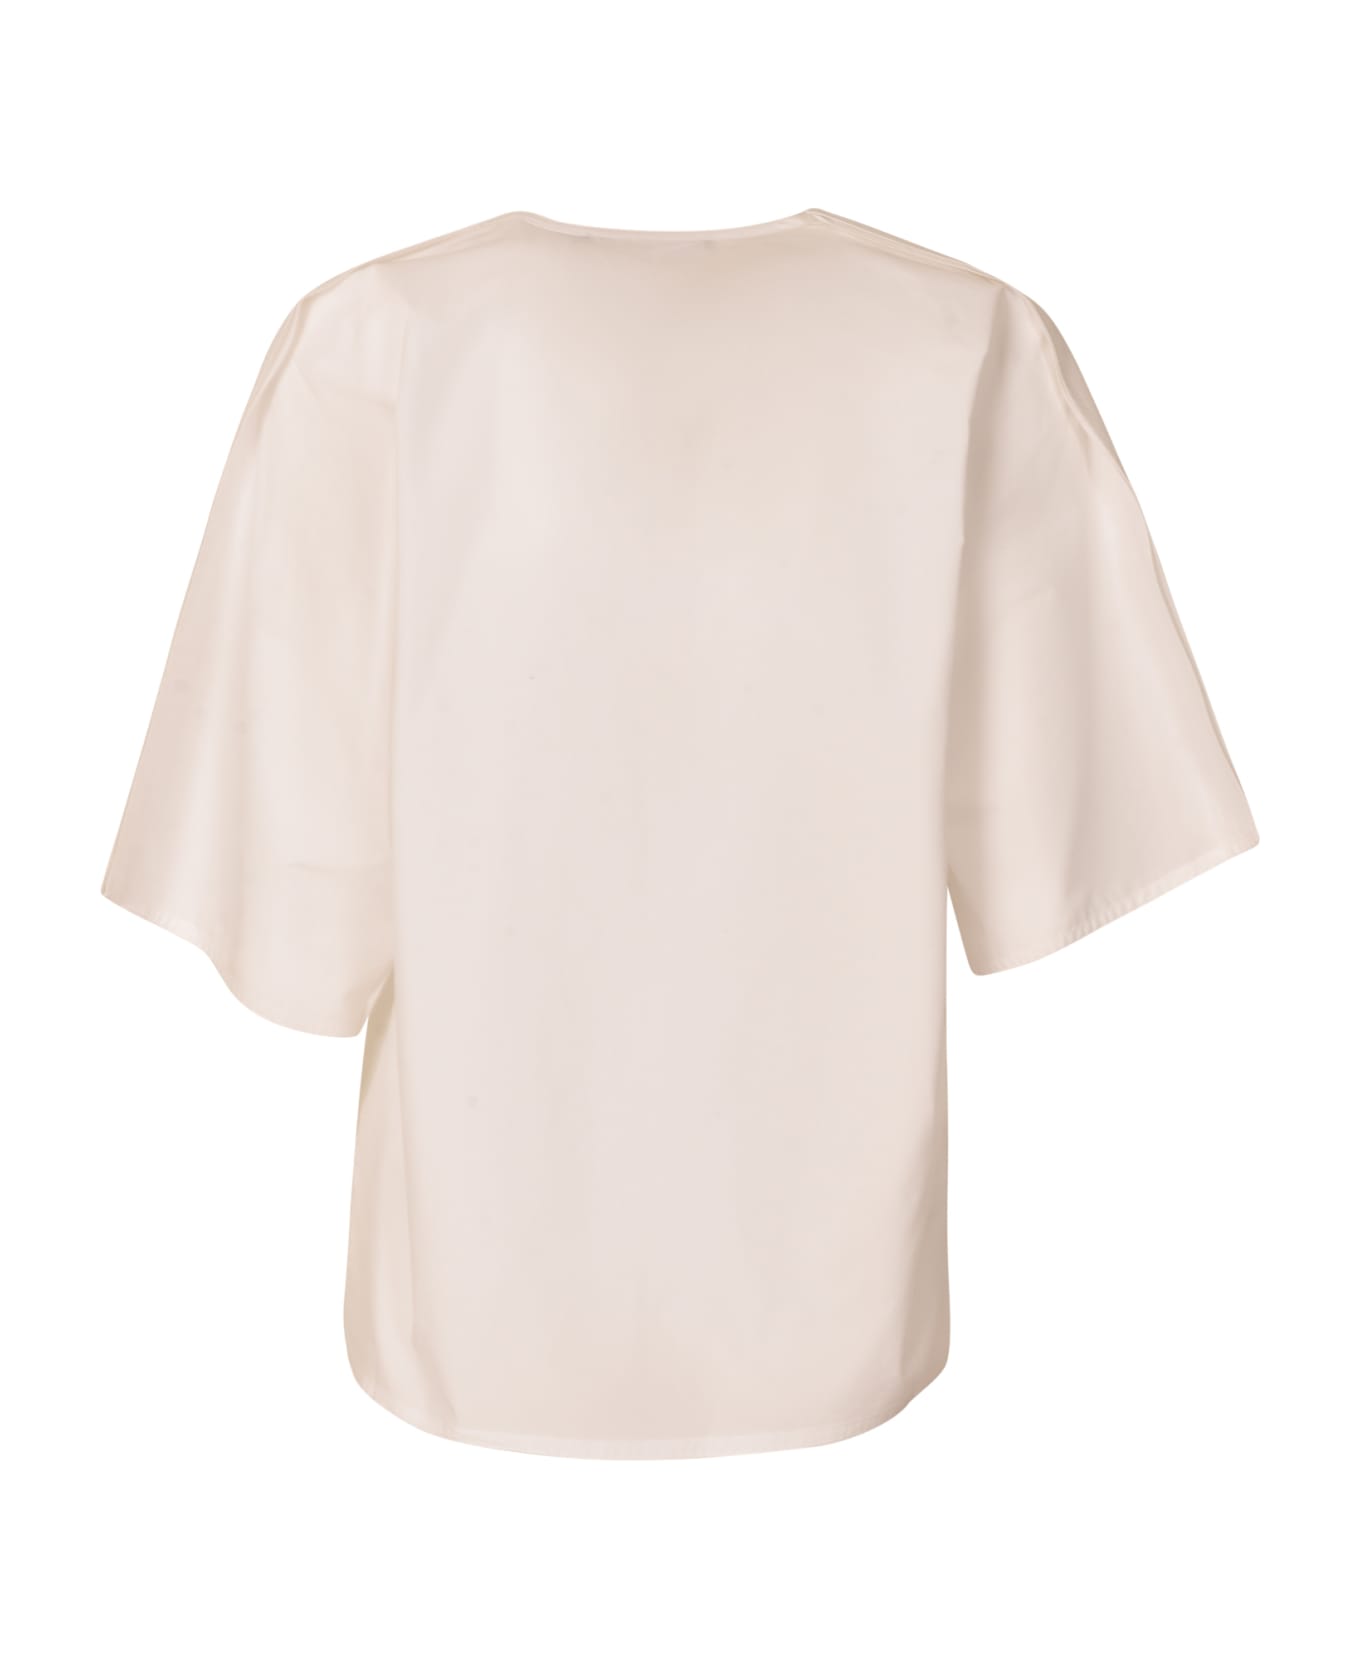 Sofie d'Hoore Cropped Blouse - White